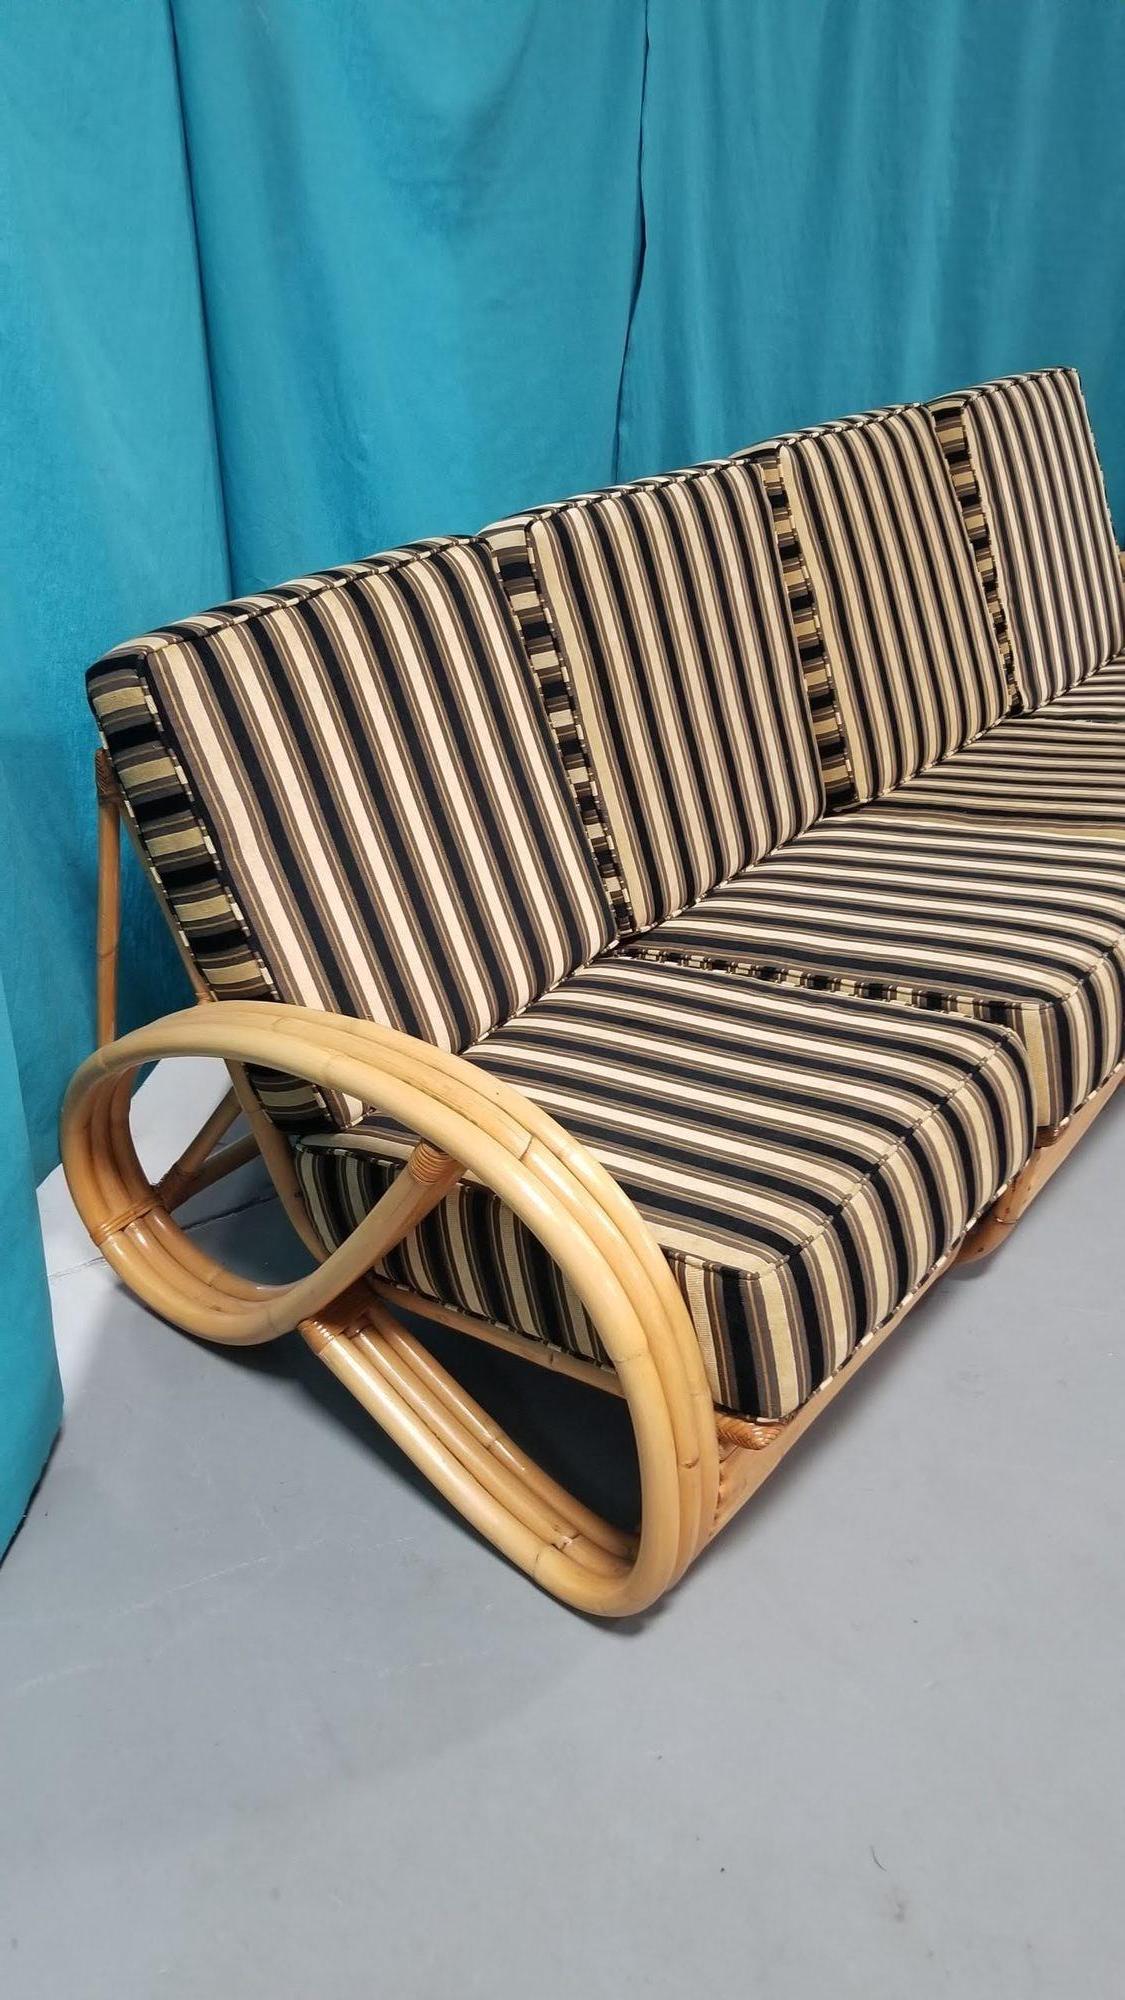 2-piece living room set of restored rattan furniture. A 3/4 pretzel arm sofa that is made up of 3 pieces and 3 seats and has a stacked rattan base, and a 3/4 pretzel adjustable lounge chair.

Couch: 32